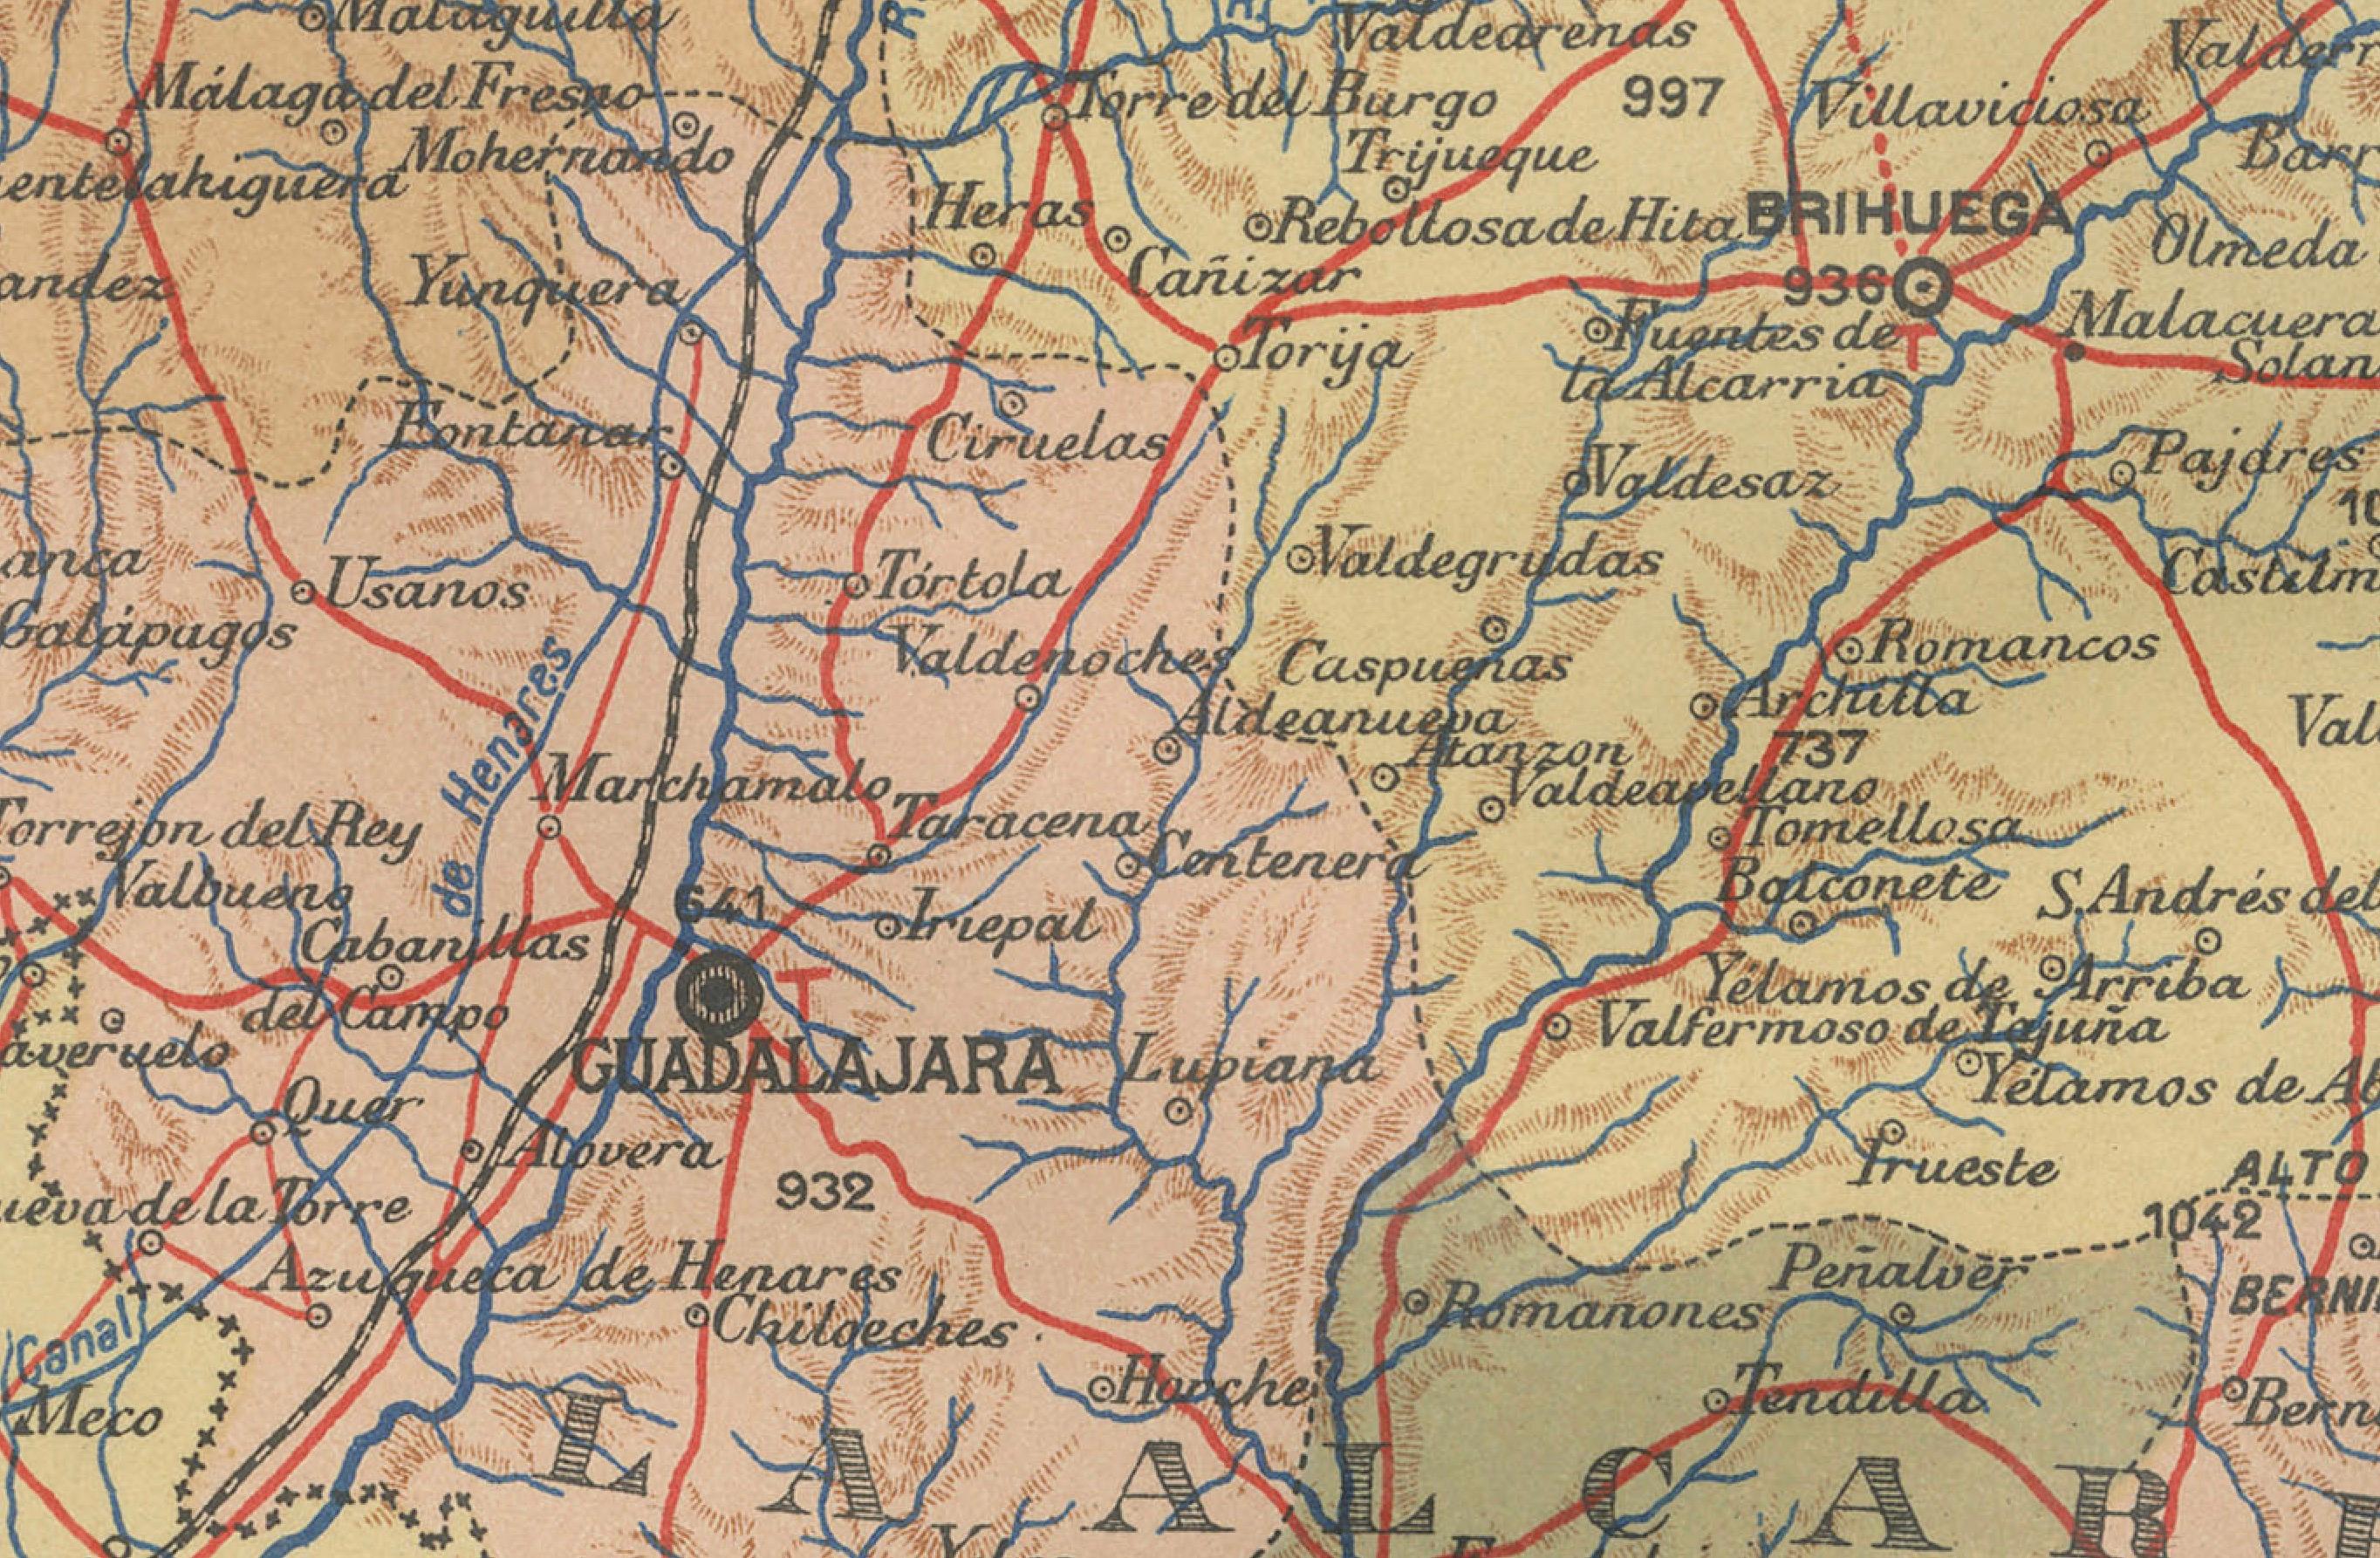 The map illustrates the province of Guadalajara, part of the autonomous community of Castilla-La Mancha in Spain, as of 1902. The map includes various geographic and infrastructural features:

It highlights the diverse landscape, which includes part